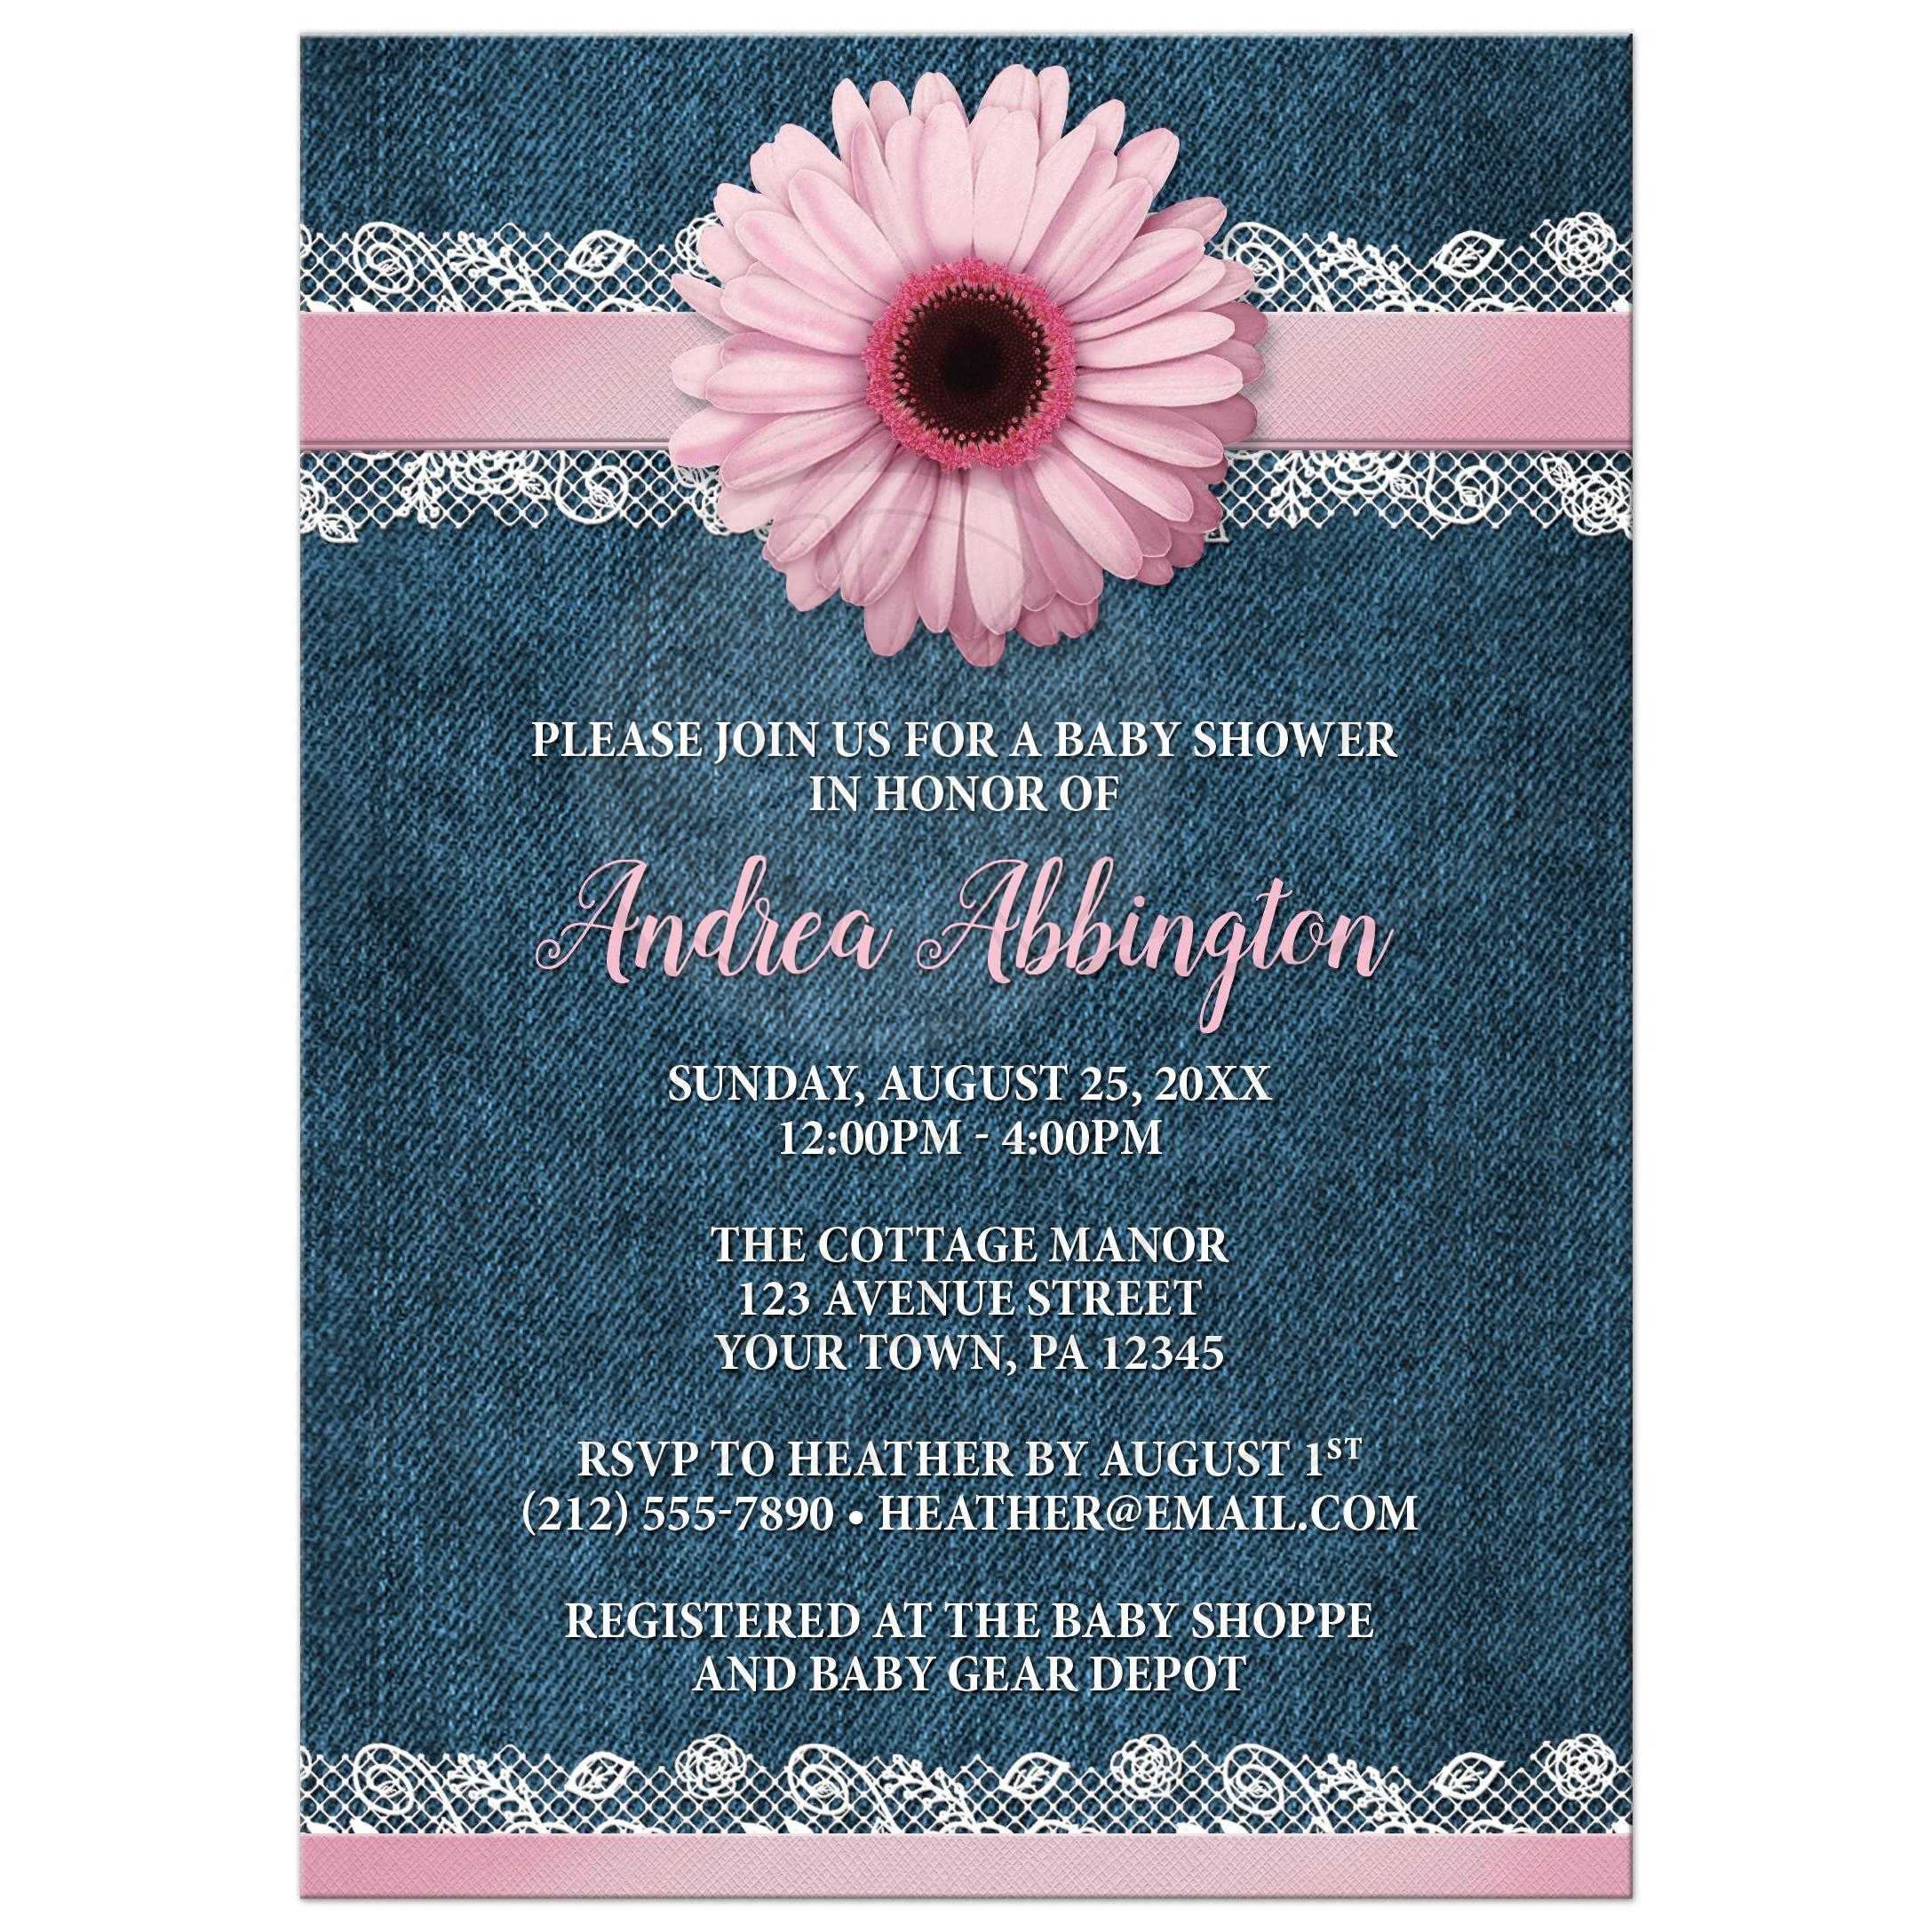 Full Size of Baby Shower:baby Shower Invitations Baby Baby Shower Tableware Creative Baby Shower Ideas Free Printable Baby Shower Games Unique Baby Shower Themes